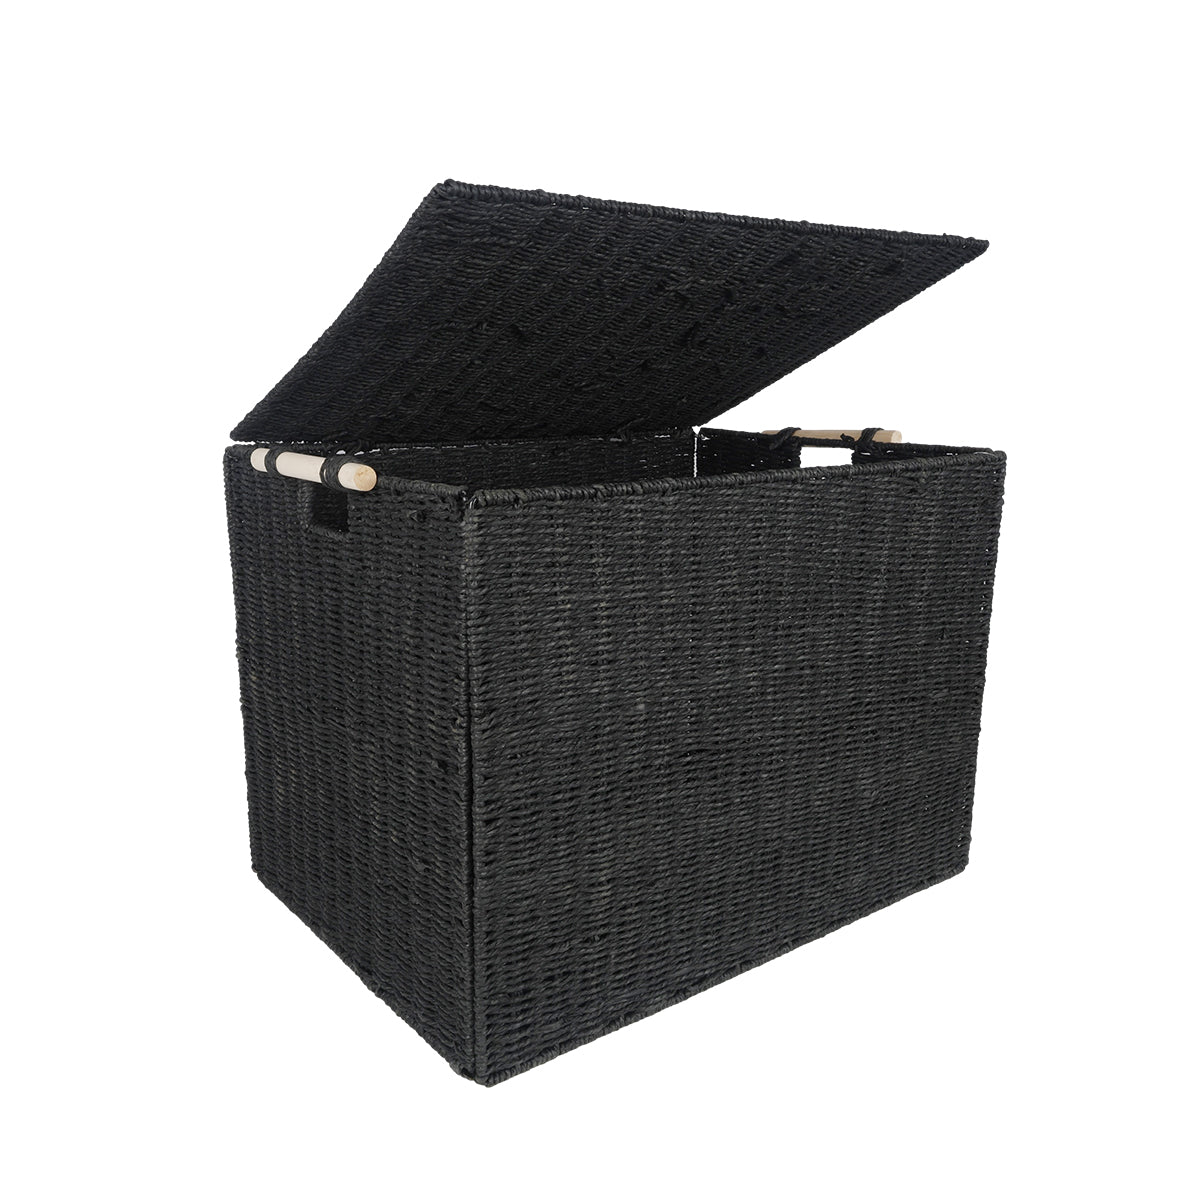 Black Paper Rope Basket With Lid / Collapsible